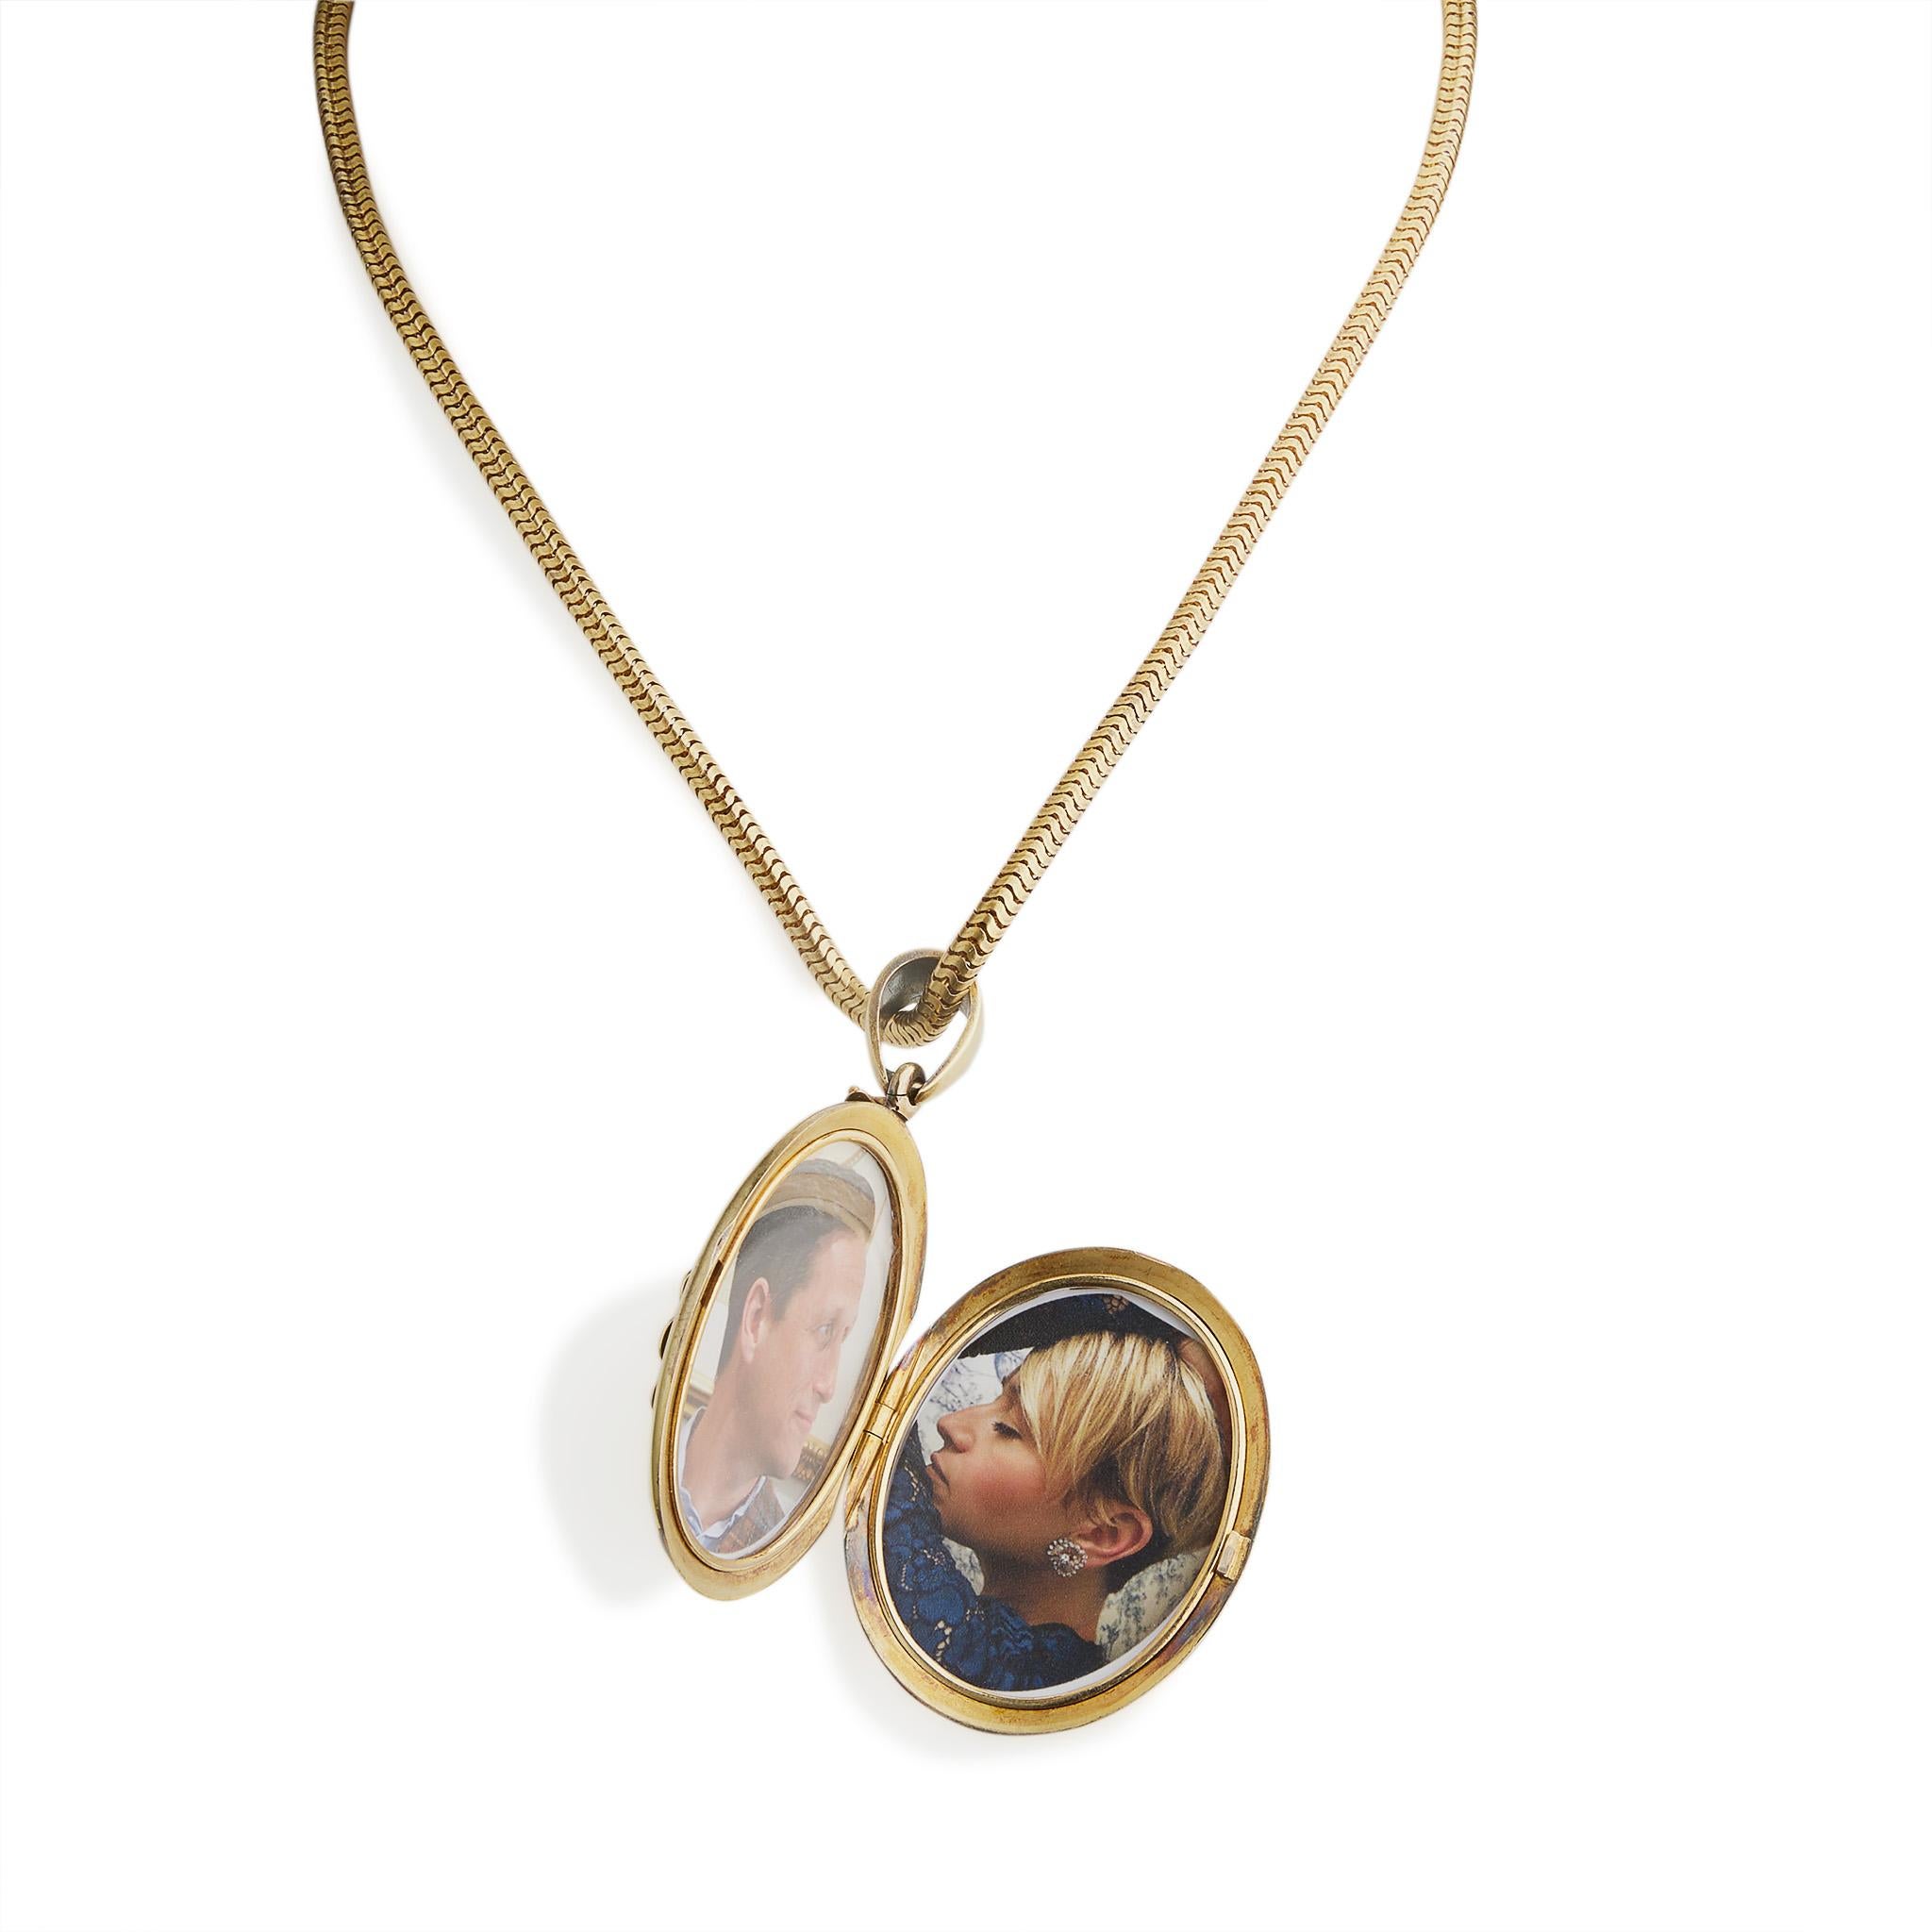 This bloomed 18K gold, pearl and diamond locket necklace dates from the Victorian period. Suspended from a smooth, snake-link chain, the bloomed oval locket centers a split seed pearl and rose-cut diamond floral motif within a stylized leaf and